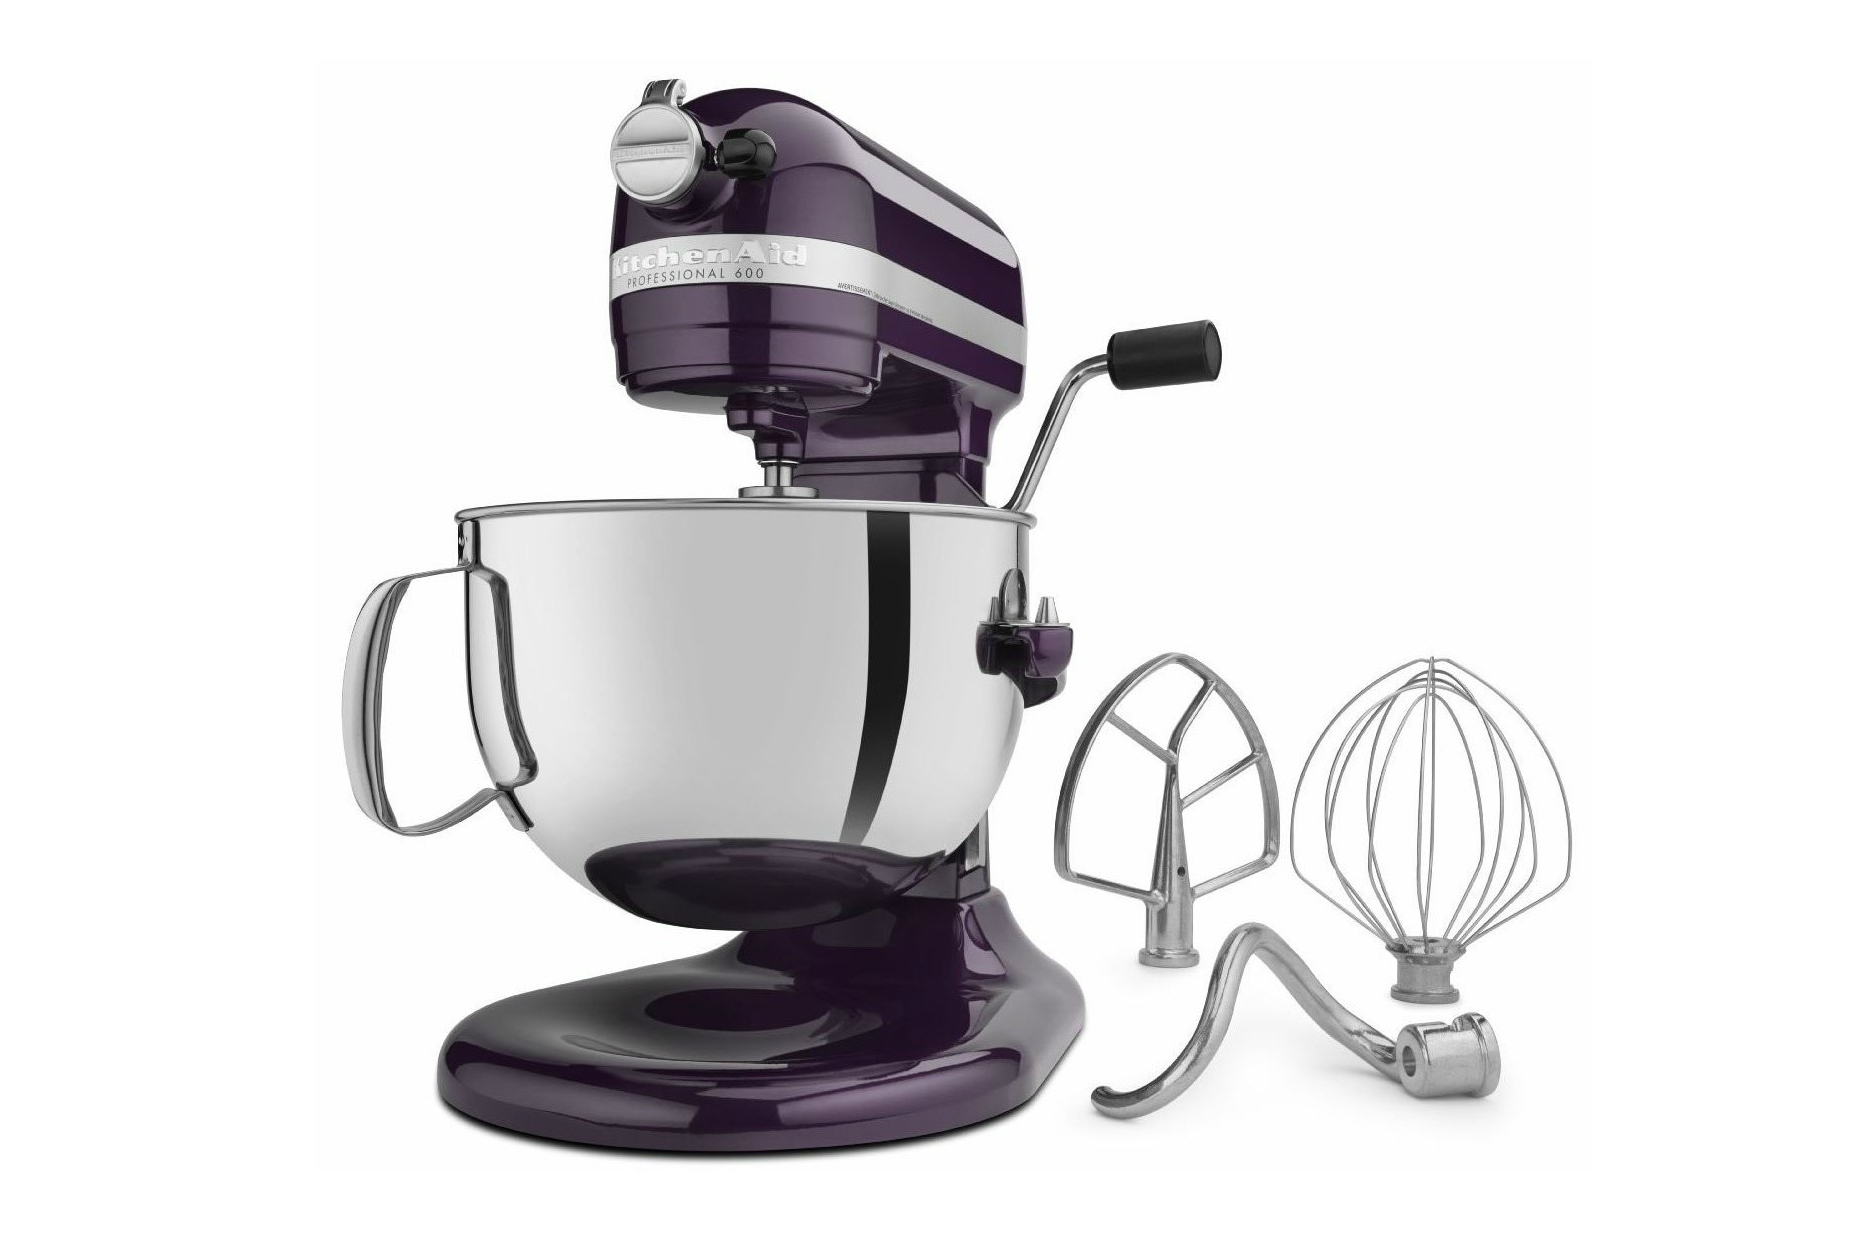 Prime Day Deal: The Perfect KitchenAid Stand Mixer Is Now On Sale